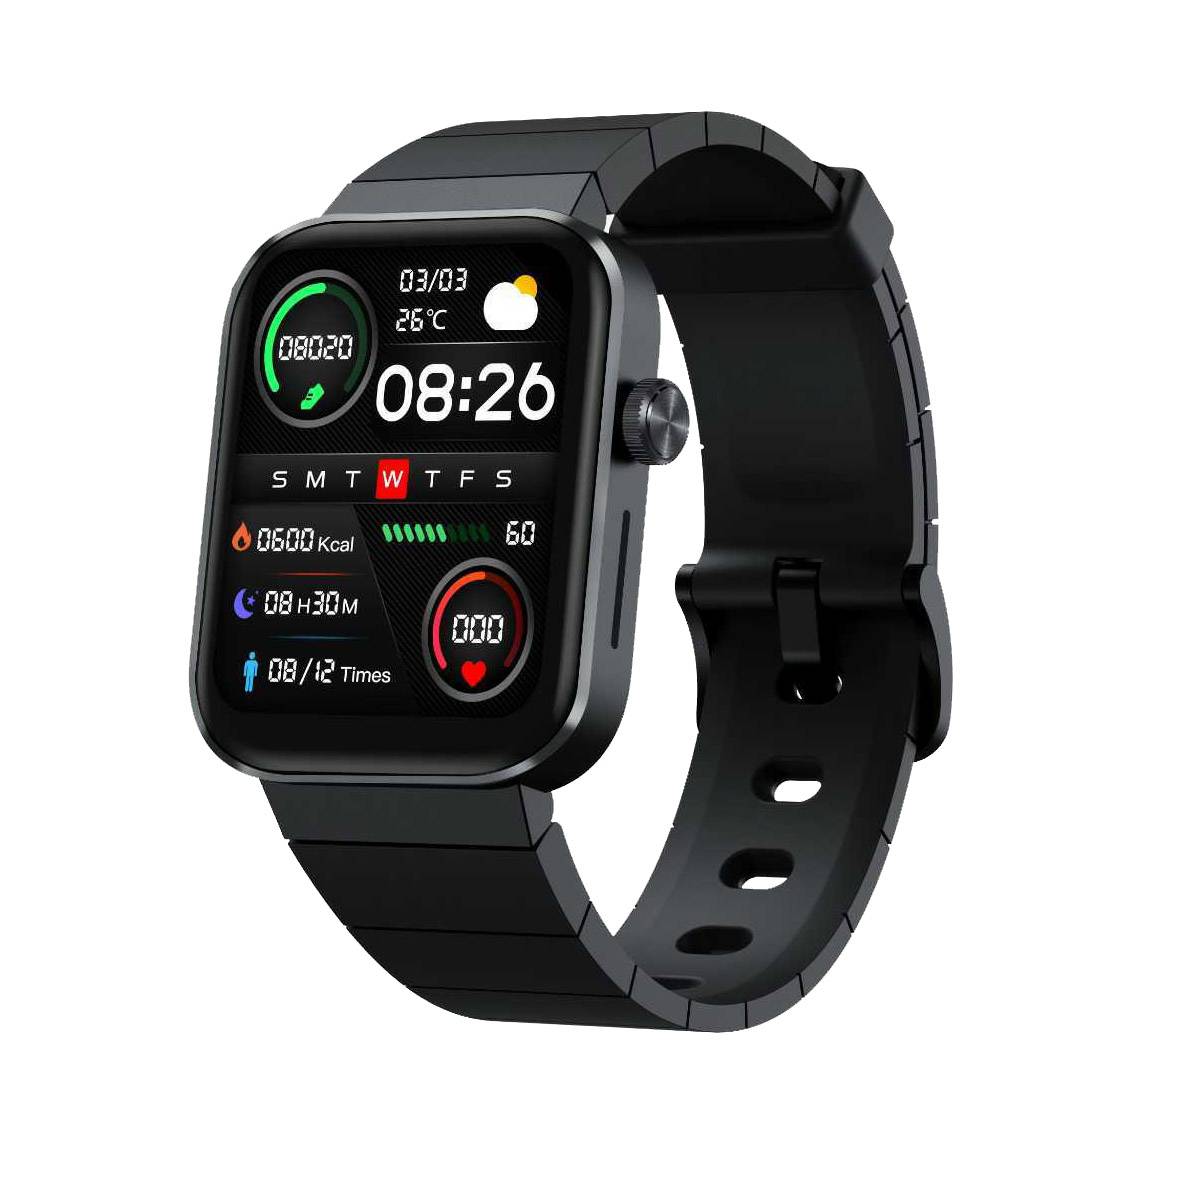 Mibro Watch T1 Smart Watch With BlueTooth Calling & Amoled Display.